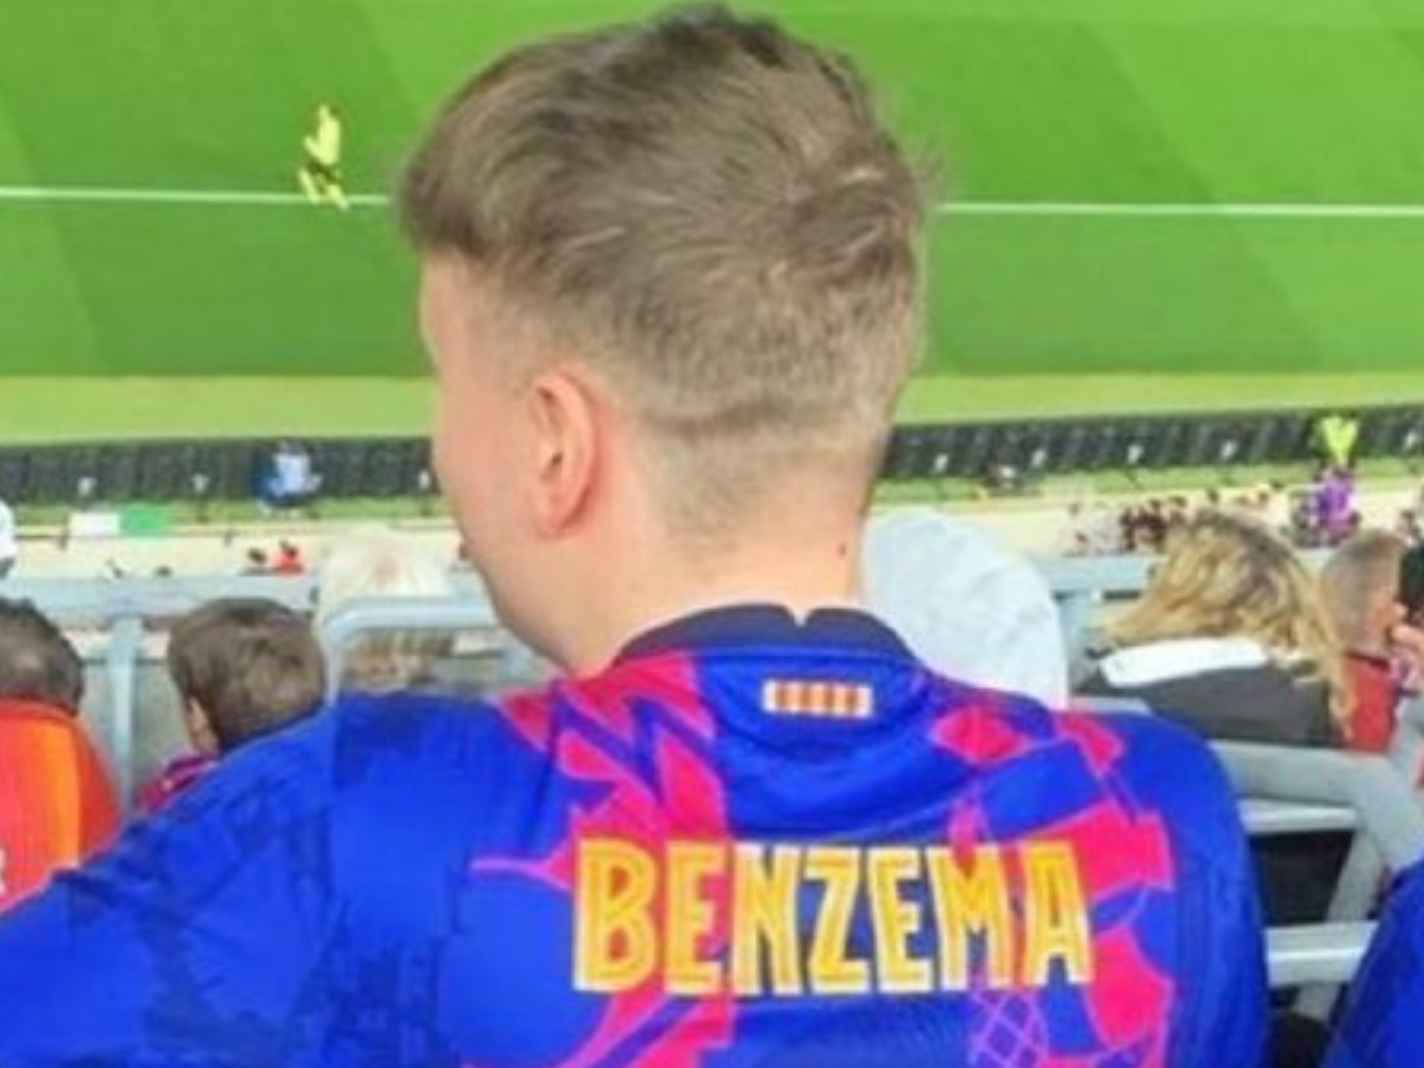 Barcelona kit with Karim Benzema's name is the weirdest thing you'll see today